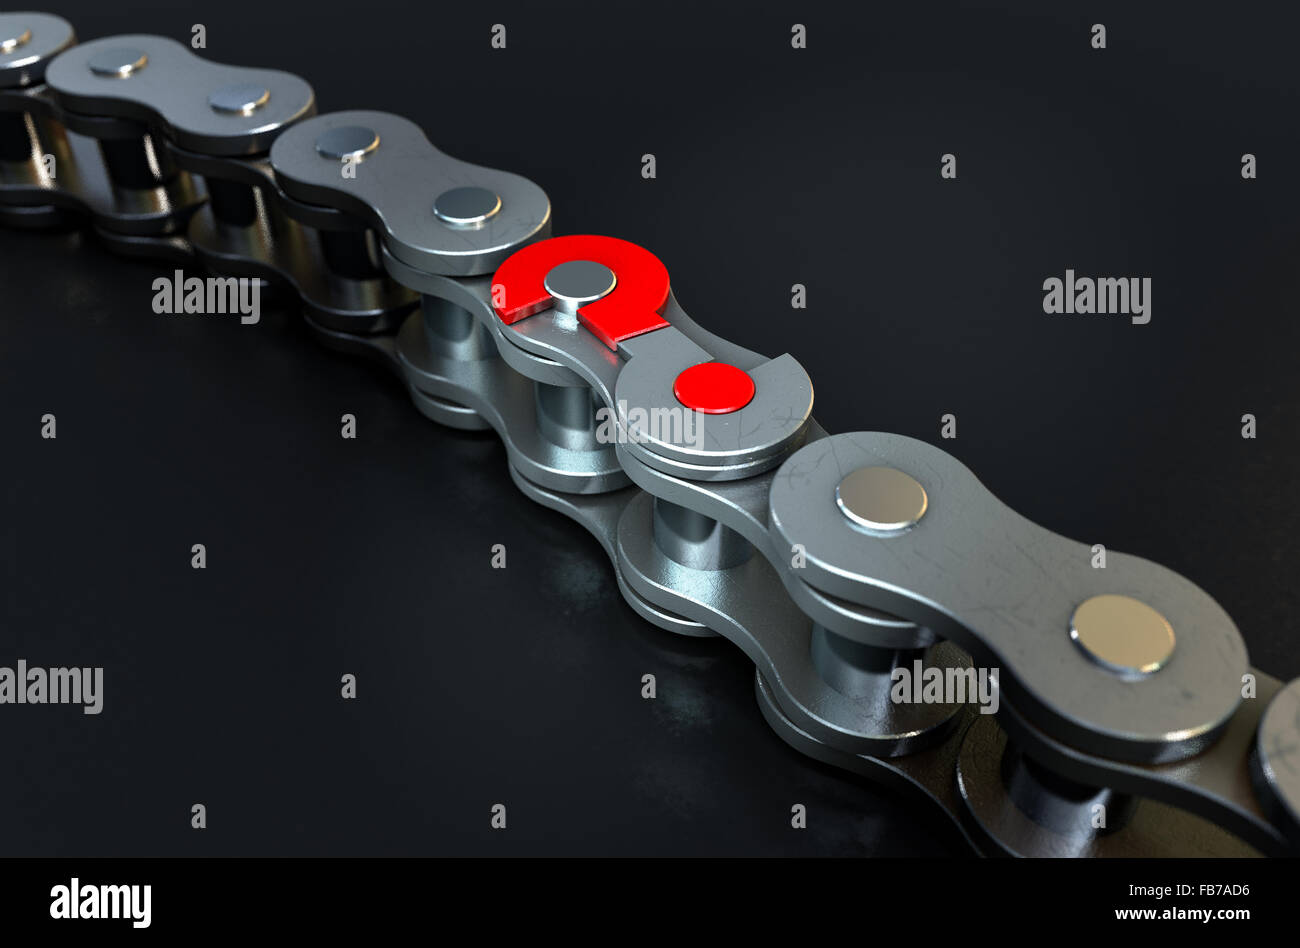 A regular bicycle chain with a question mark as its master link on a dark isolated background Stock Photo